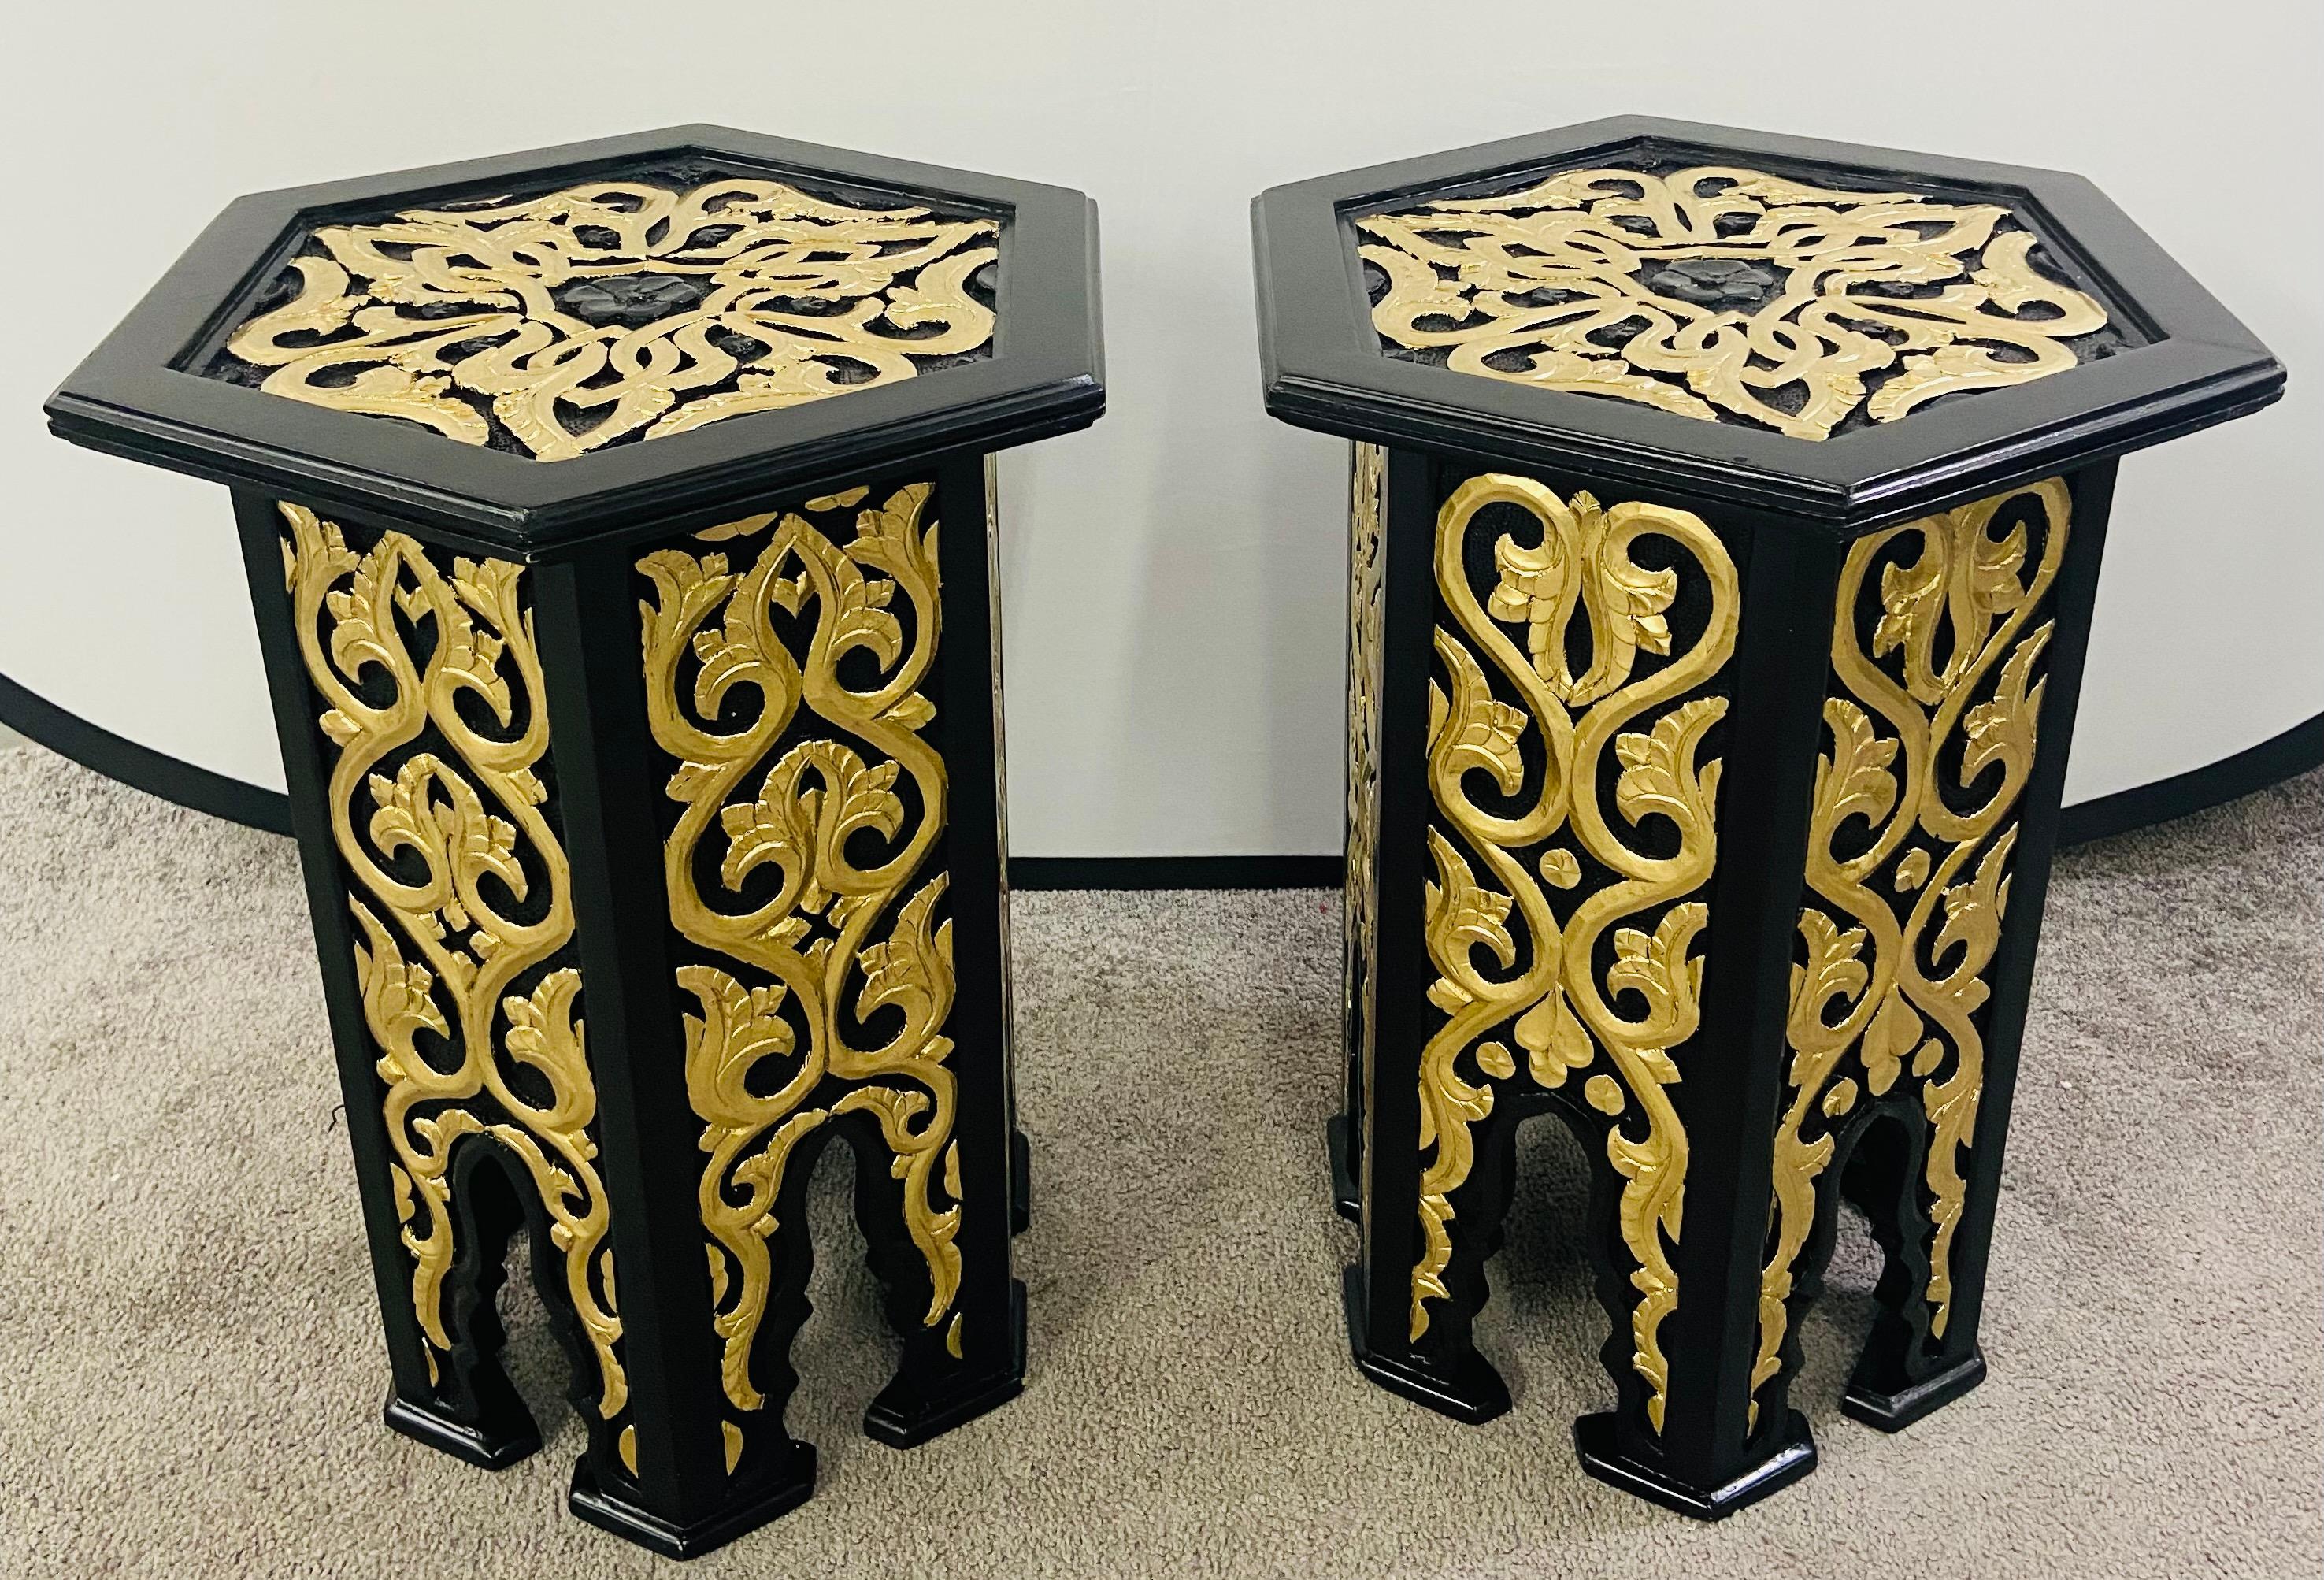 An exquisite pair of Hollywood Regency Moroccan style side or end table featuring an hexagonal shape. The handmade ebony tables are finely decorated in leaves Pattern painted in gold and beautiful arches, a staple of the moorish timeless